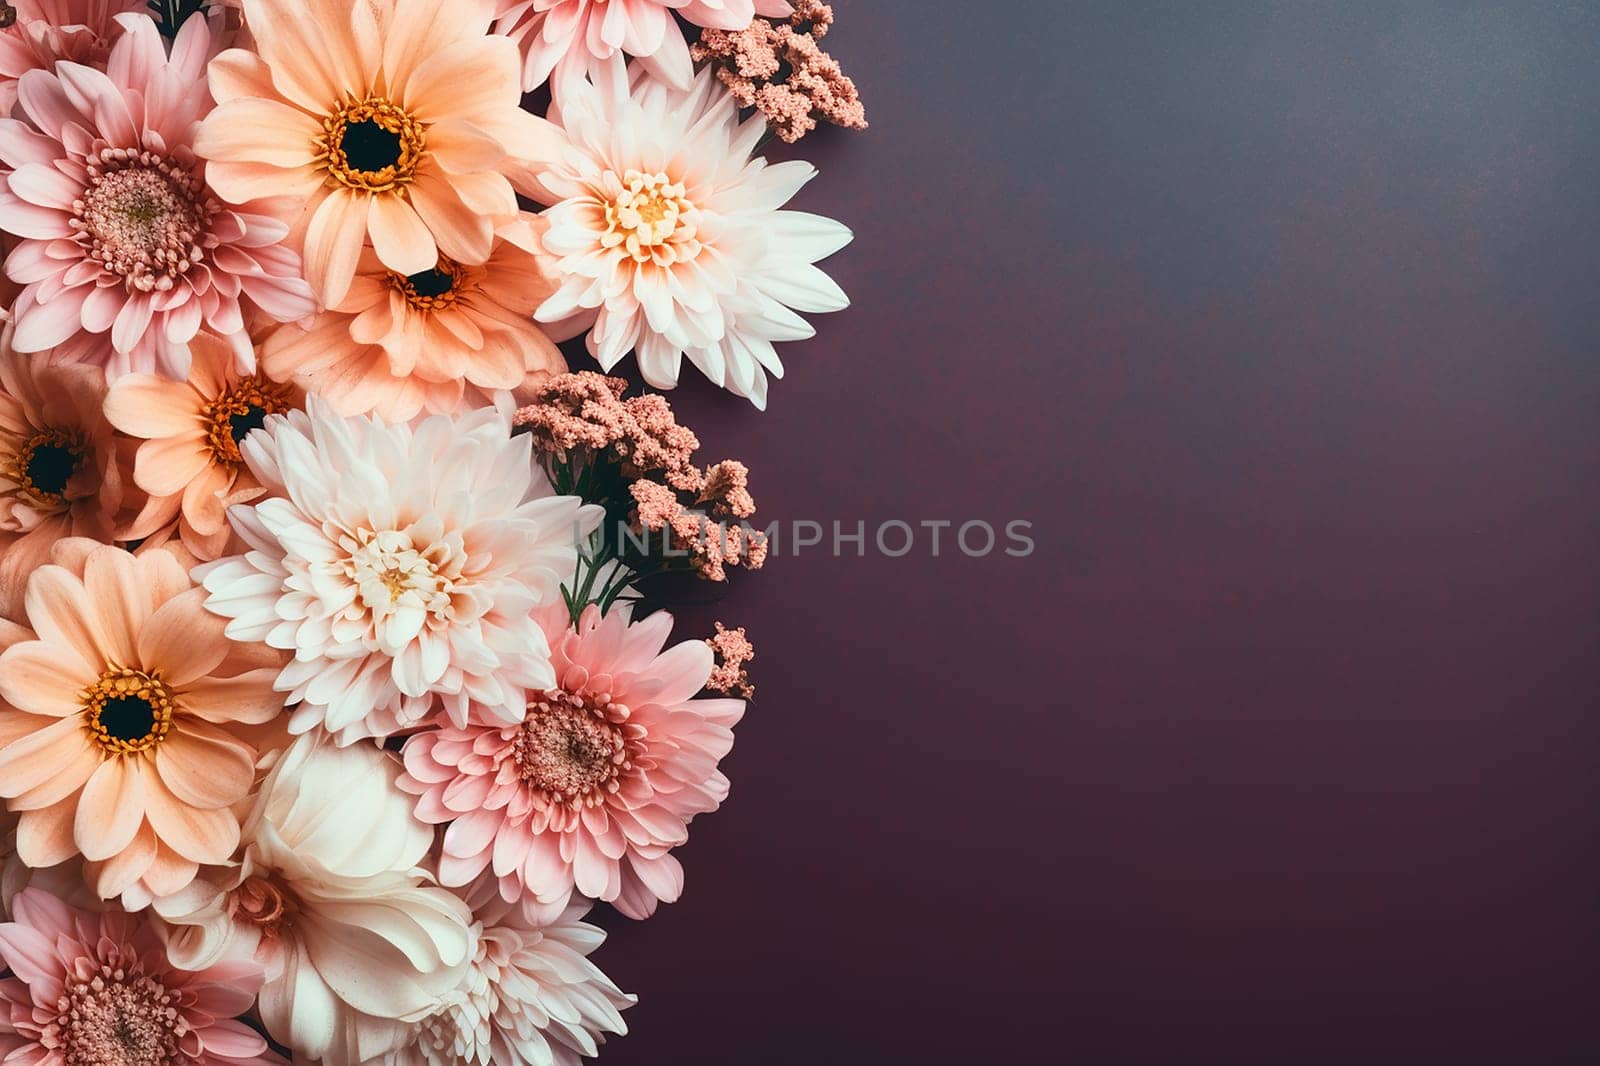 Assortment of beautiful flowers on a gradient background. by Hype2art